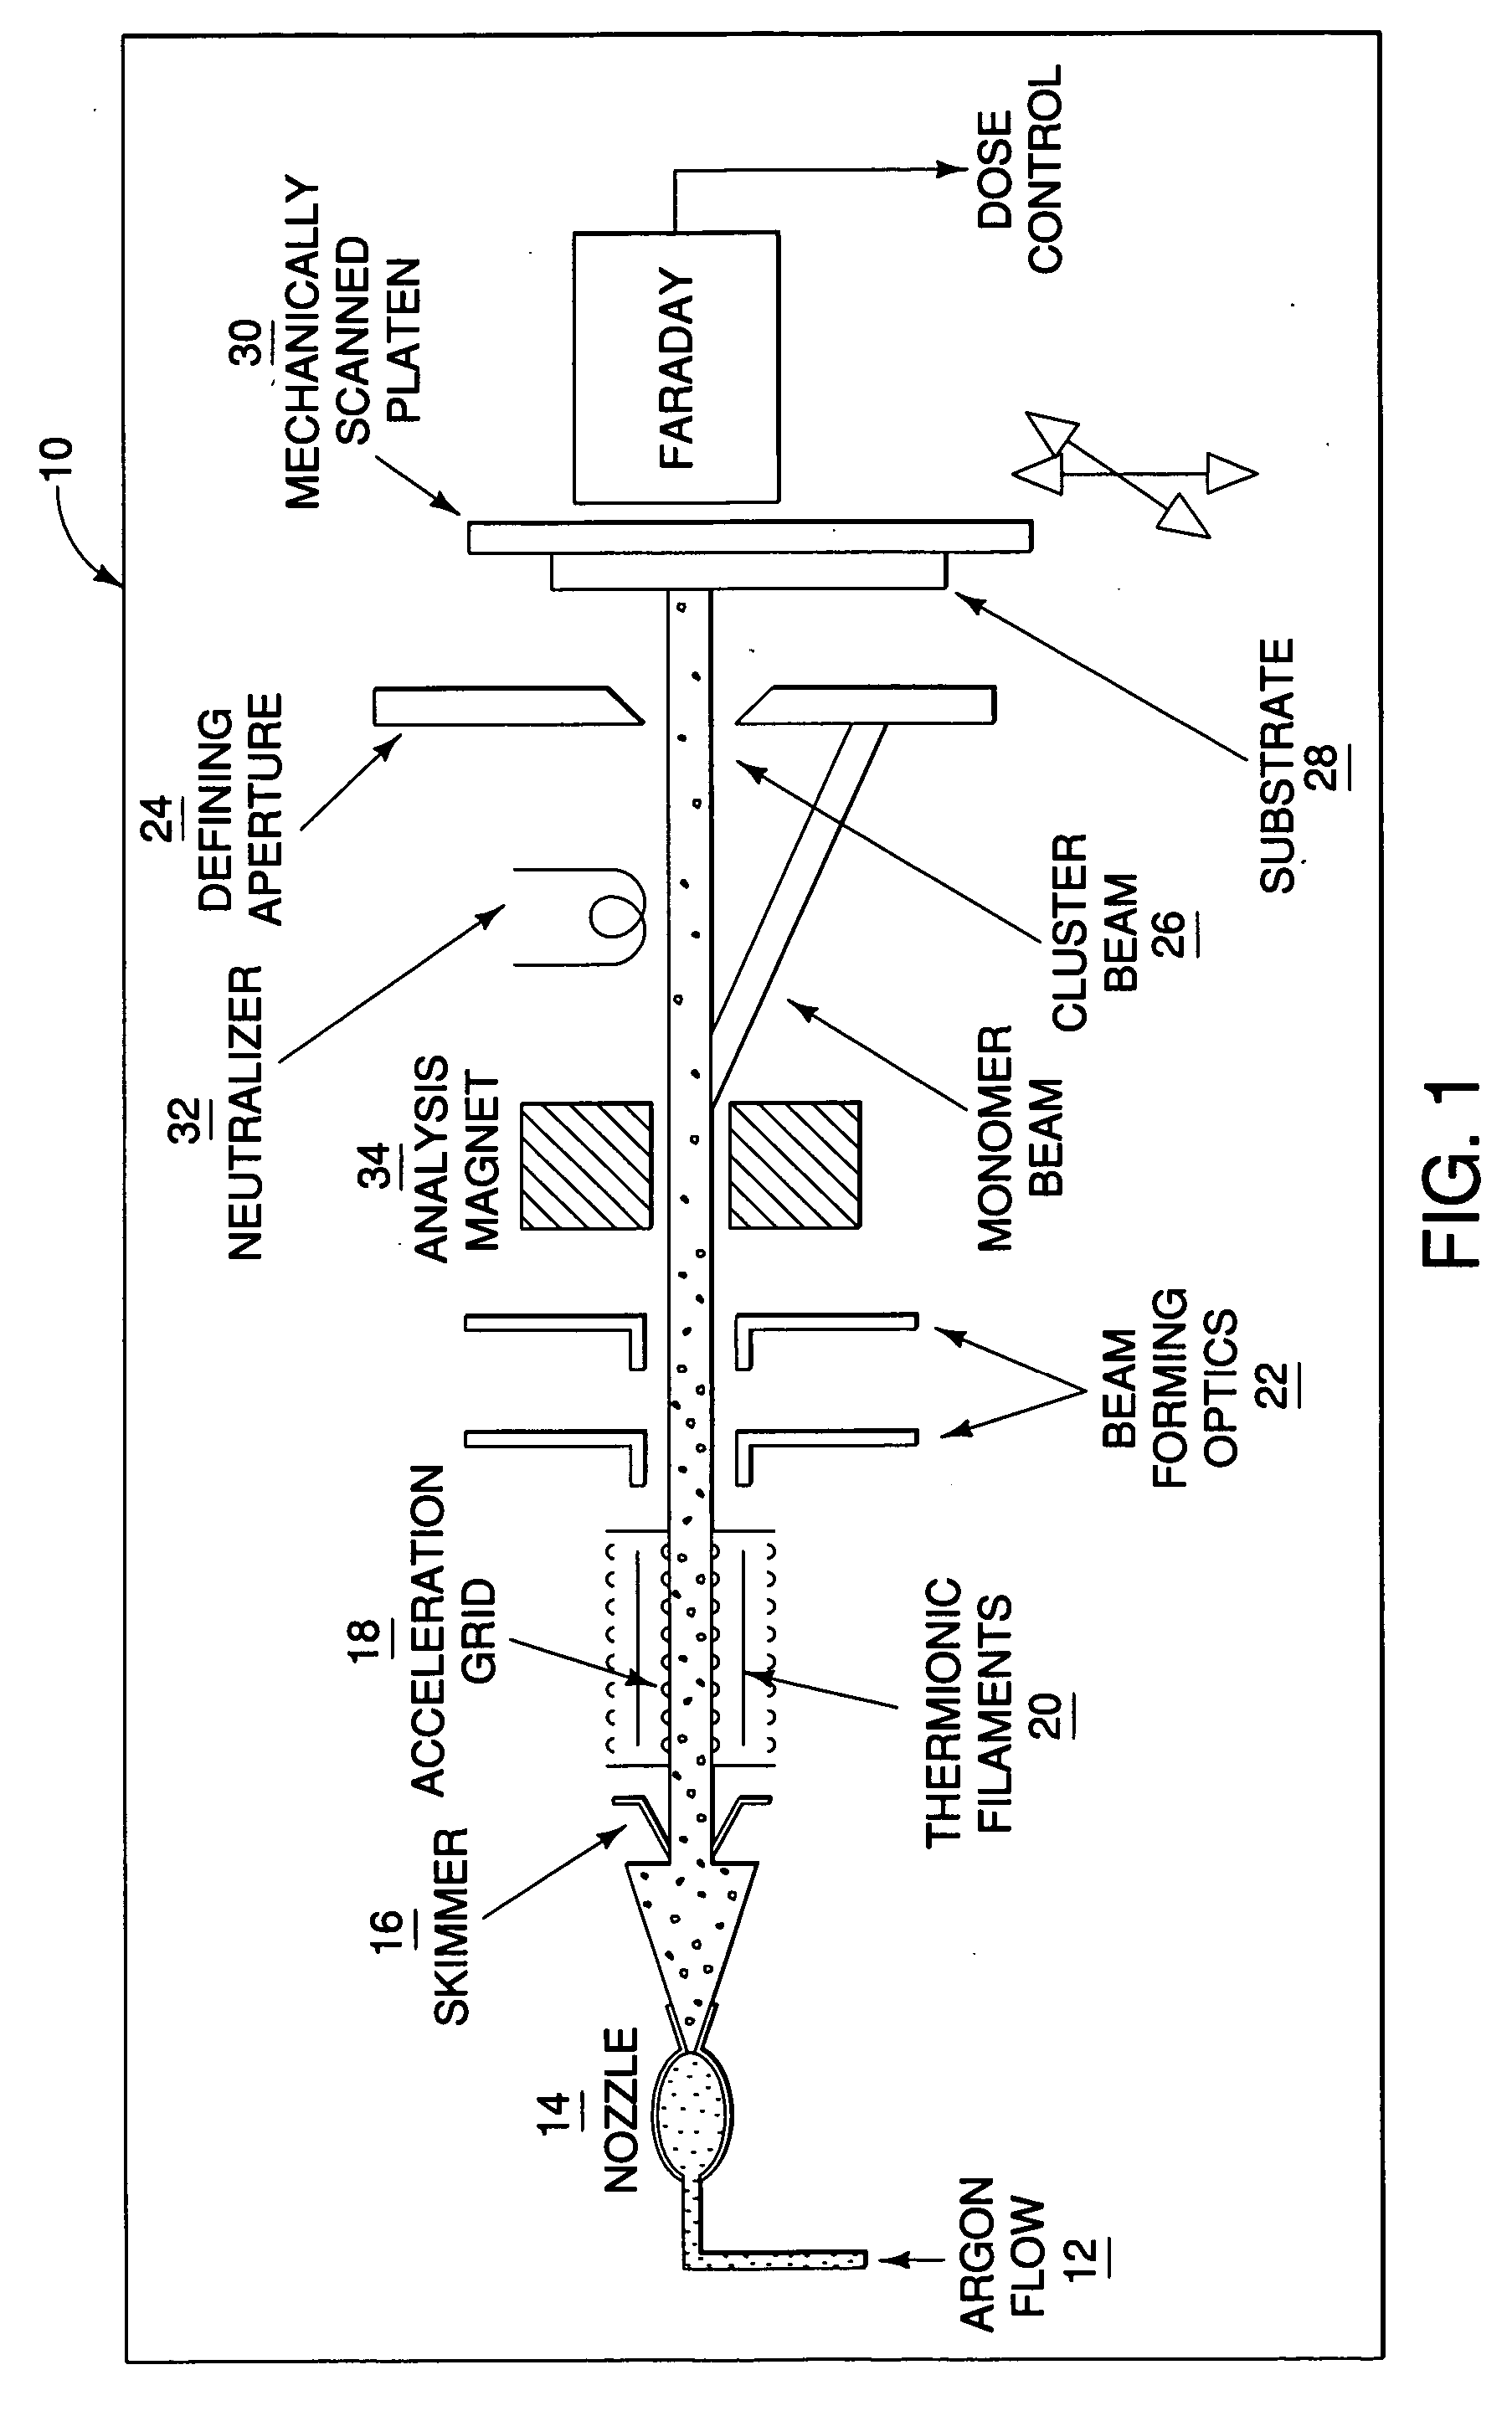 Apparatus and method for polishing gemstones and the like